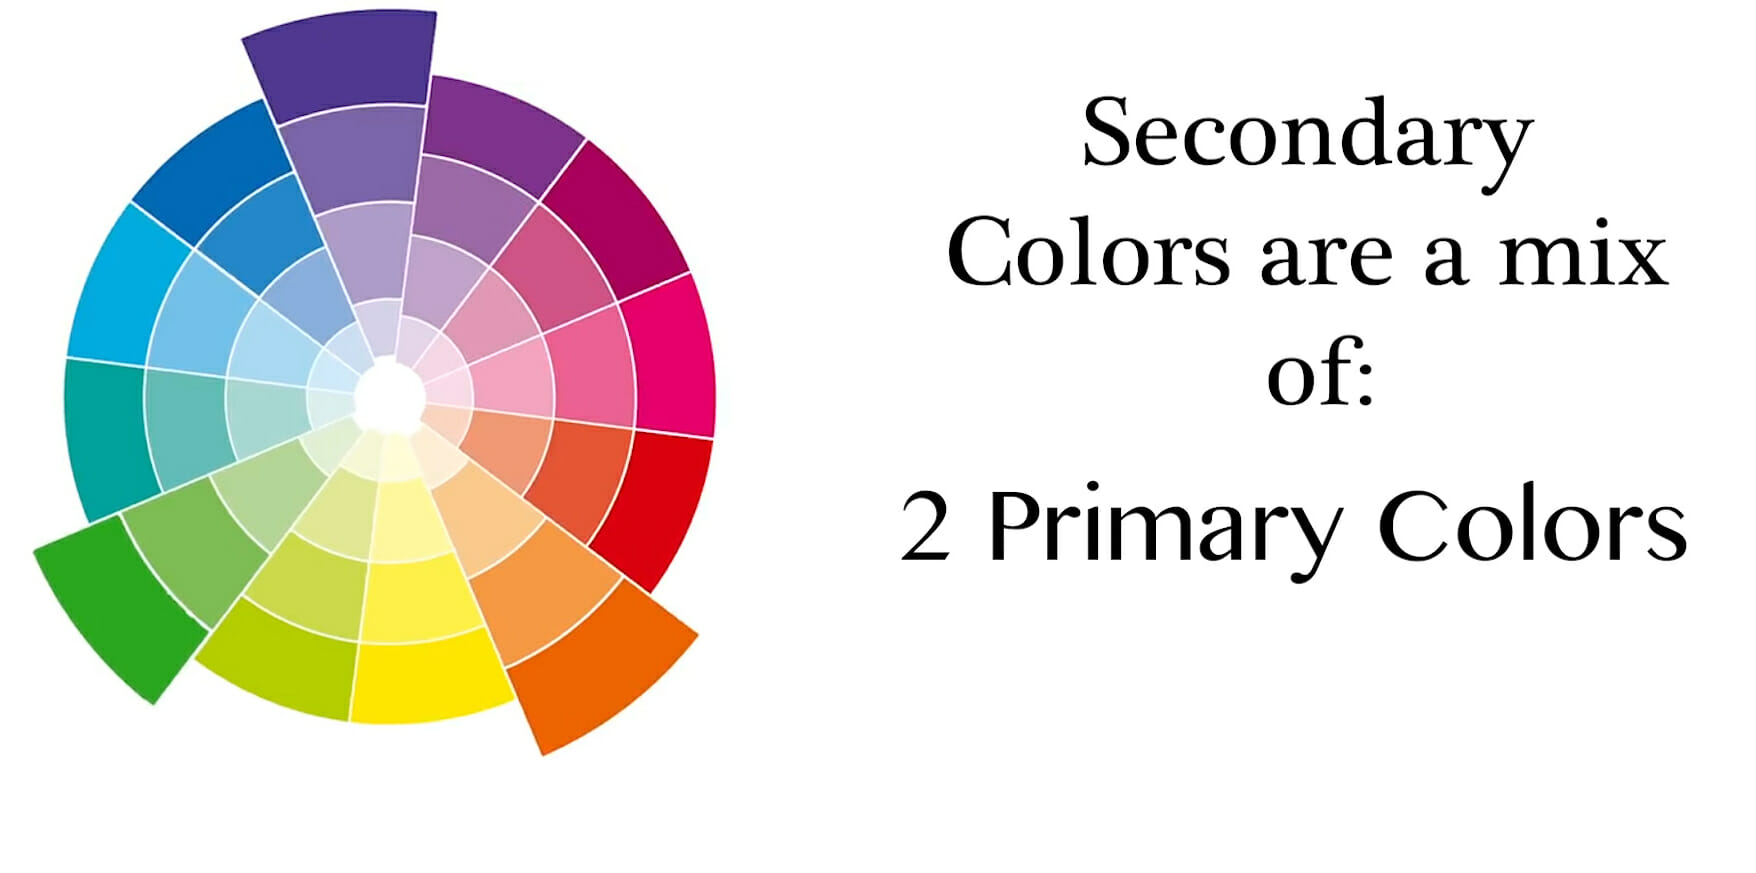 Secondary Colors are a mix of: 2 Primary Colors – A color wheel with orange, green and purple sections extended.